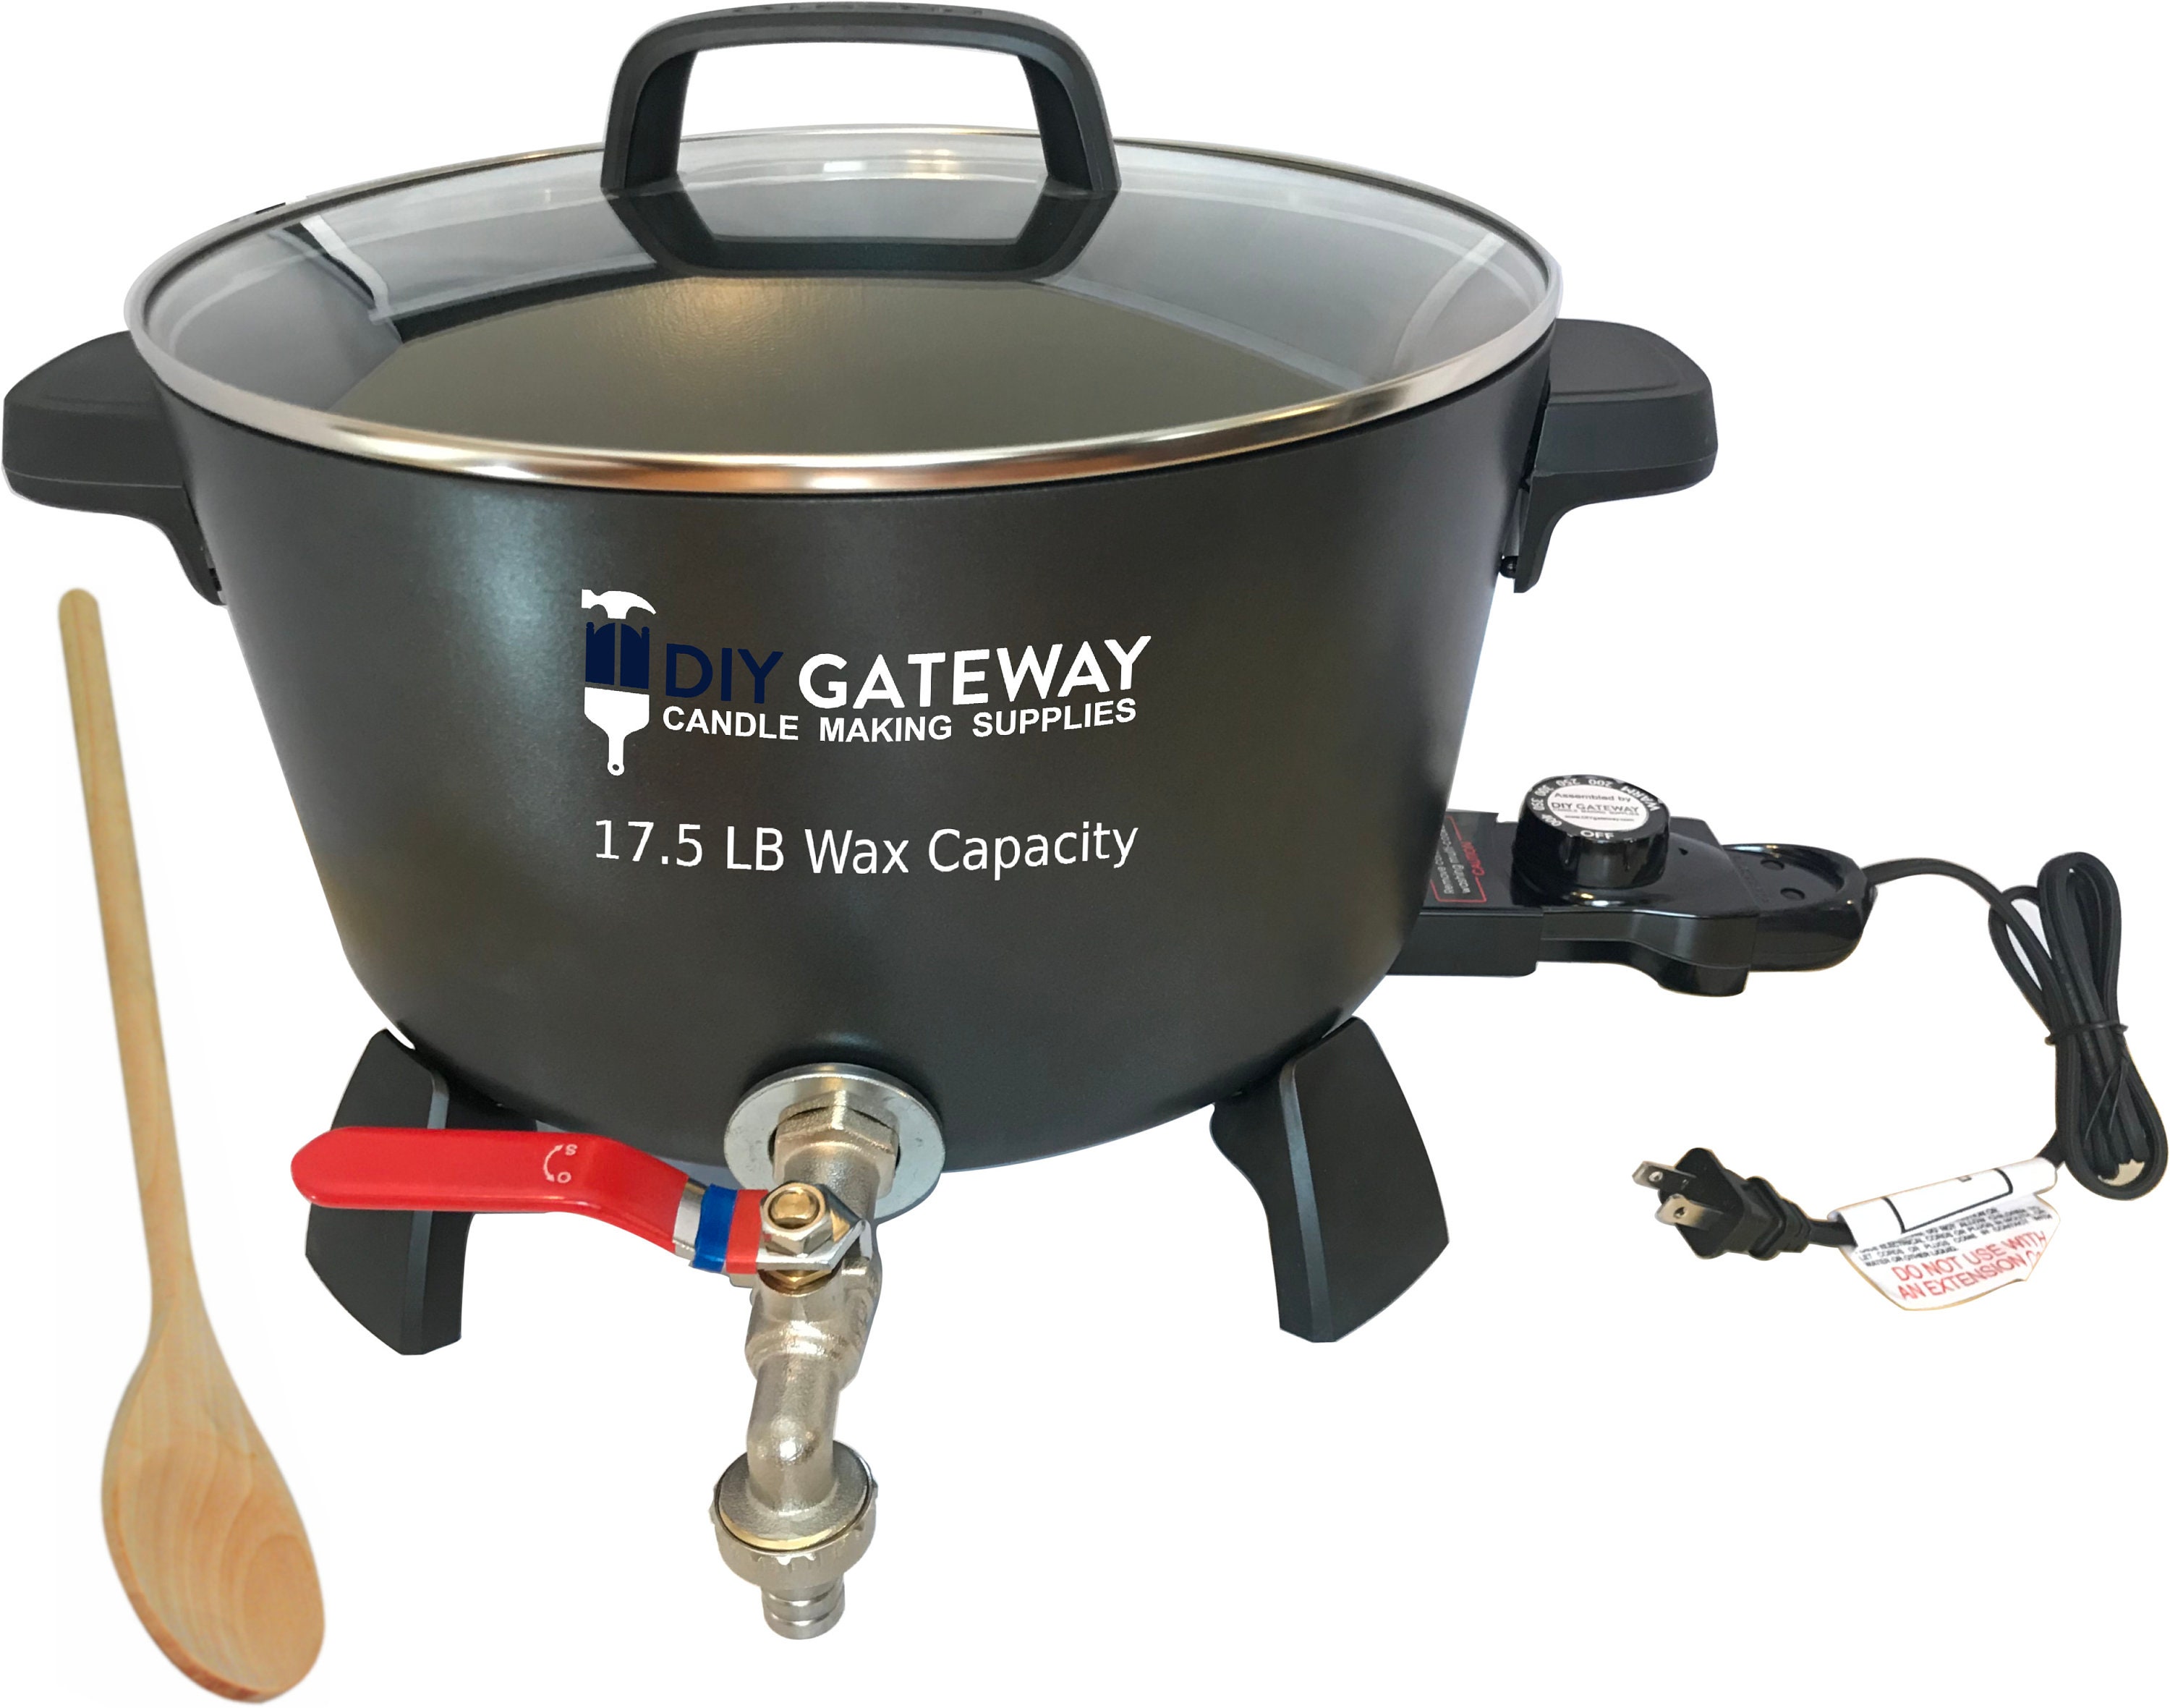 BBAXI Candle Making Pouring Pot with Electric Hot Plate for Melting Wax,  Candle Wax Melting Pot with Heat-Resistant Handle and Long Stain Spoon